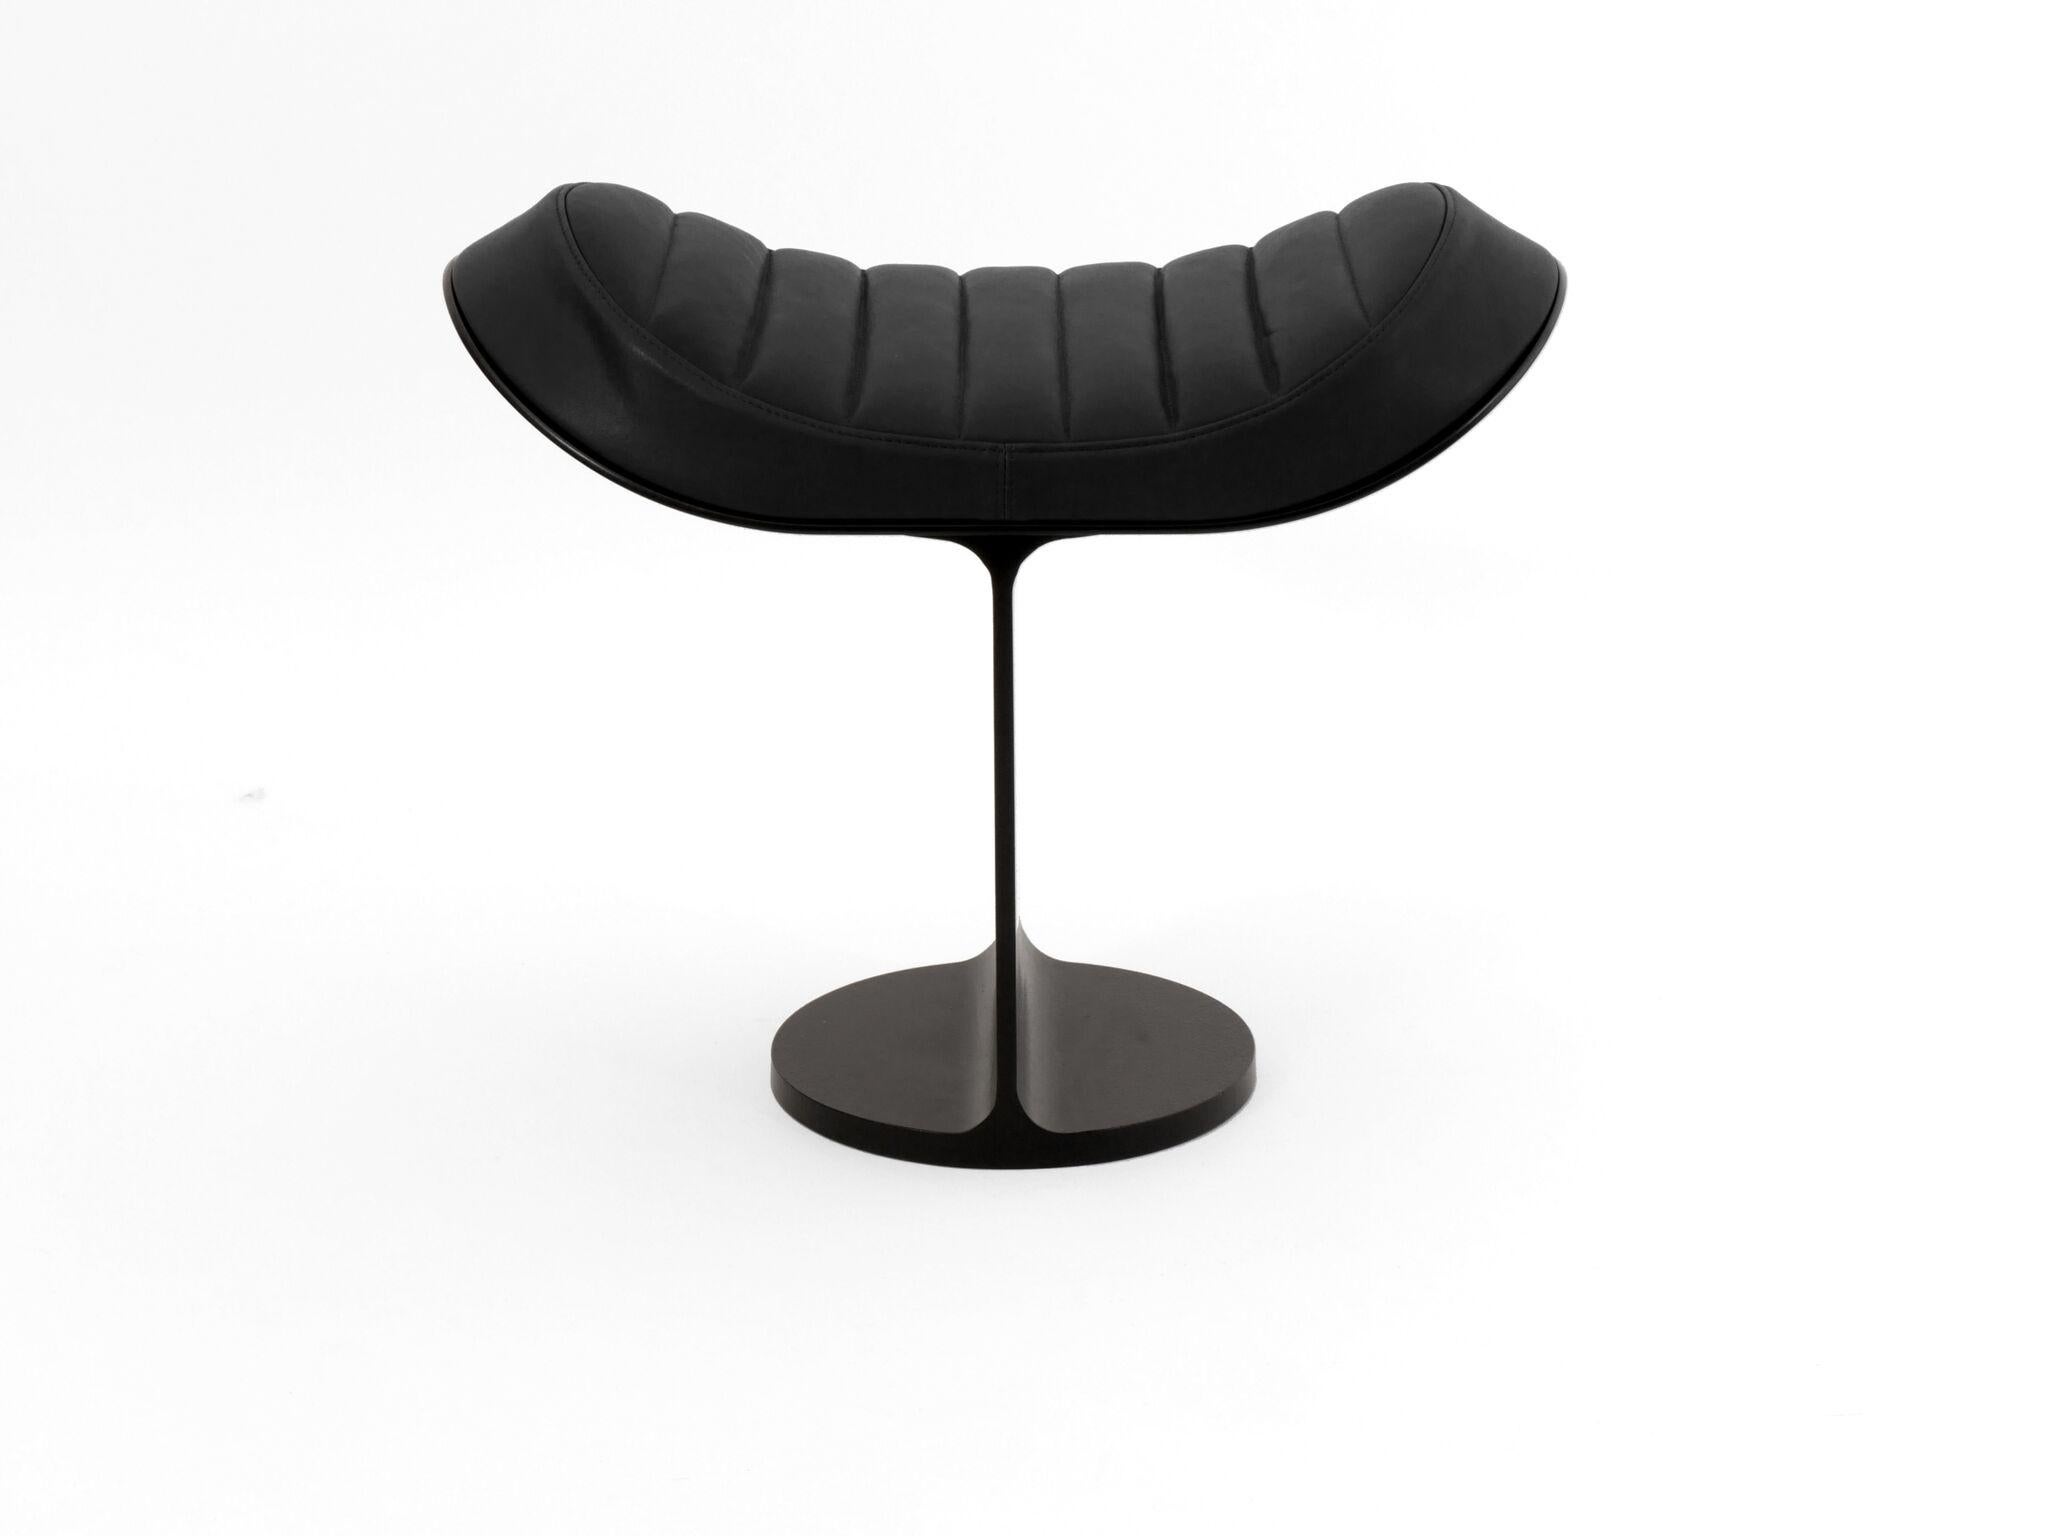 T-beam shaped minimalist design stool with powder coated finish metal base and leather upholstered seat. Designed by Christophe de la Fontaine.